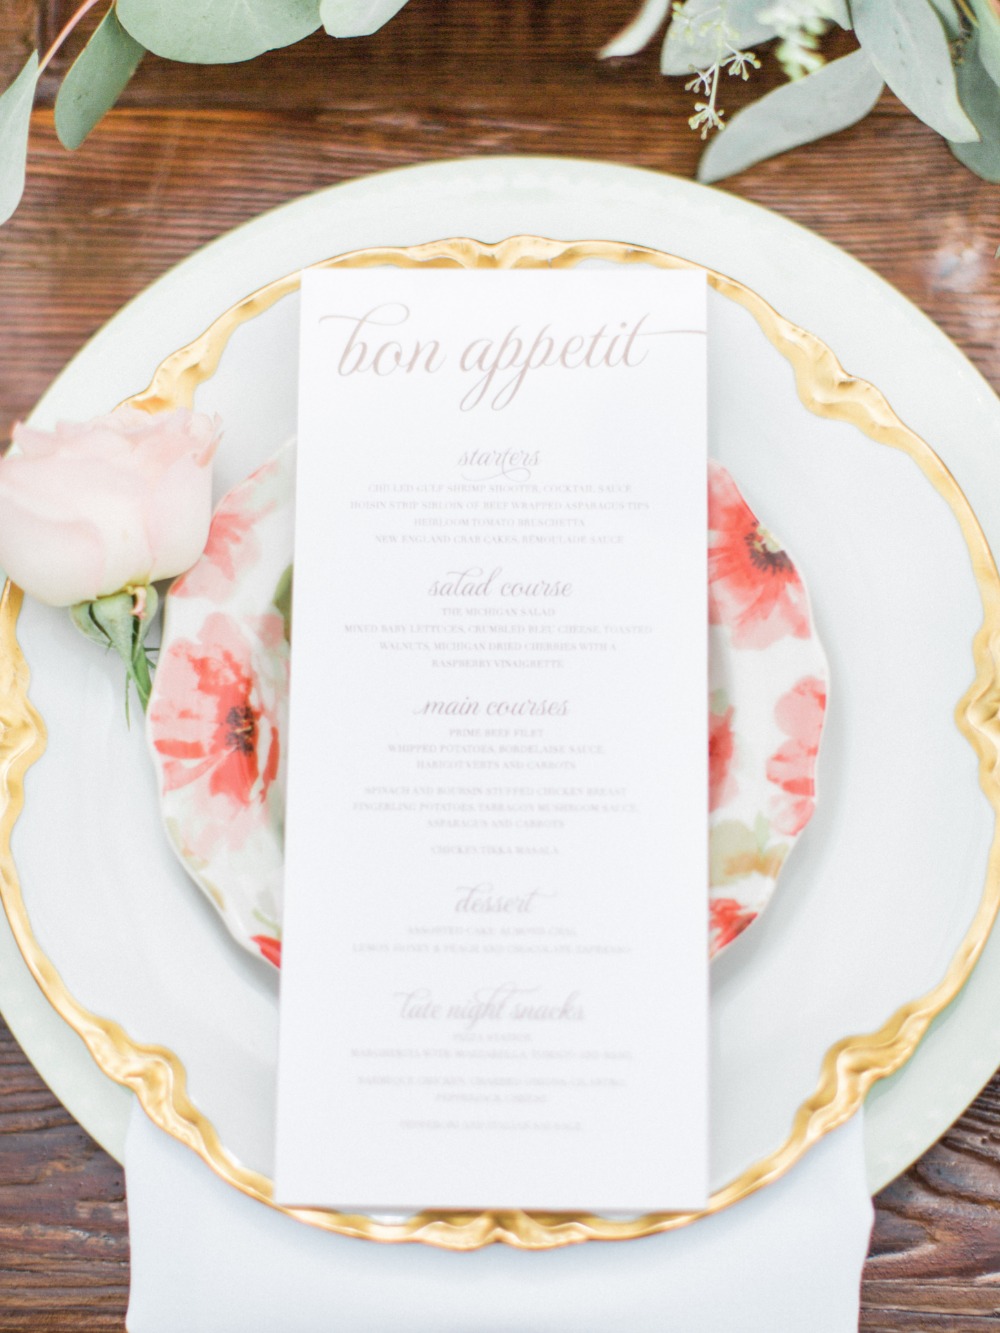 Wedding menu and placesetting details